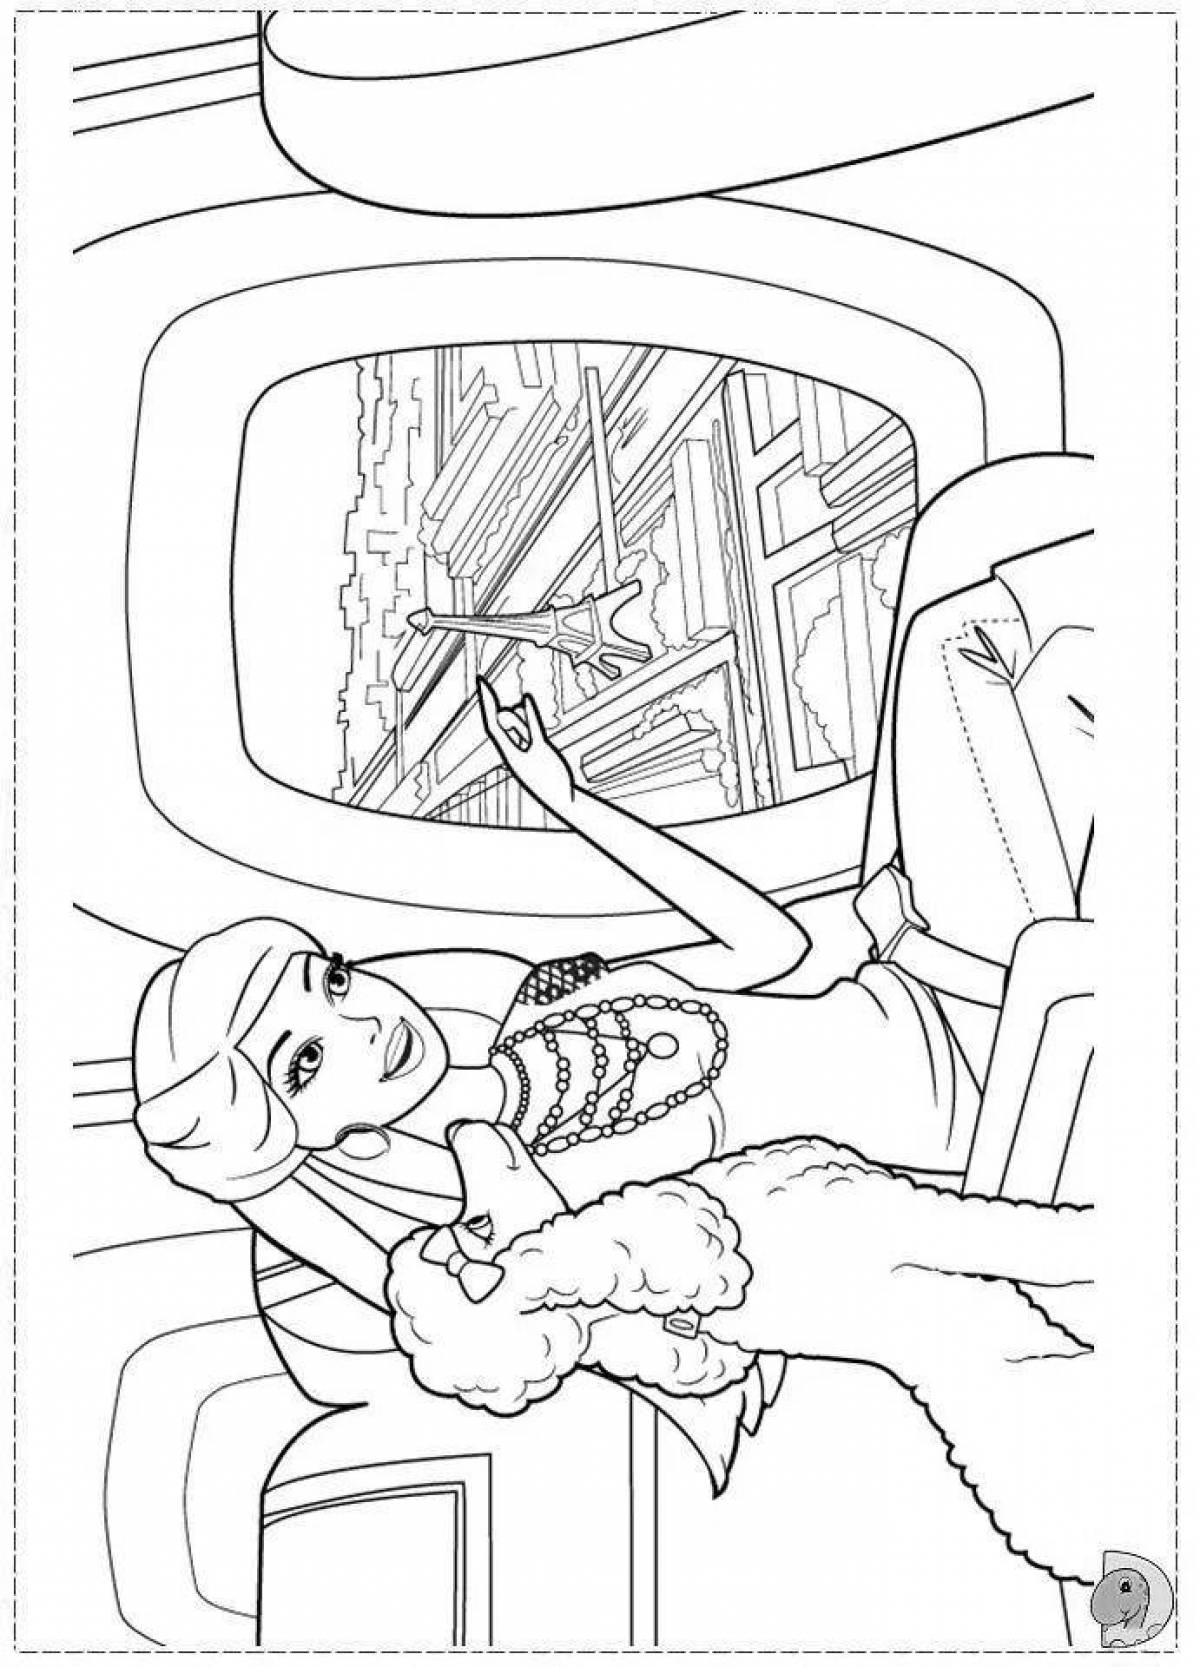 Gorgeous barbie in the car coloring book